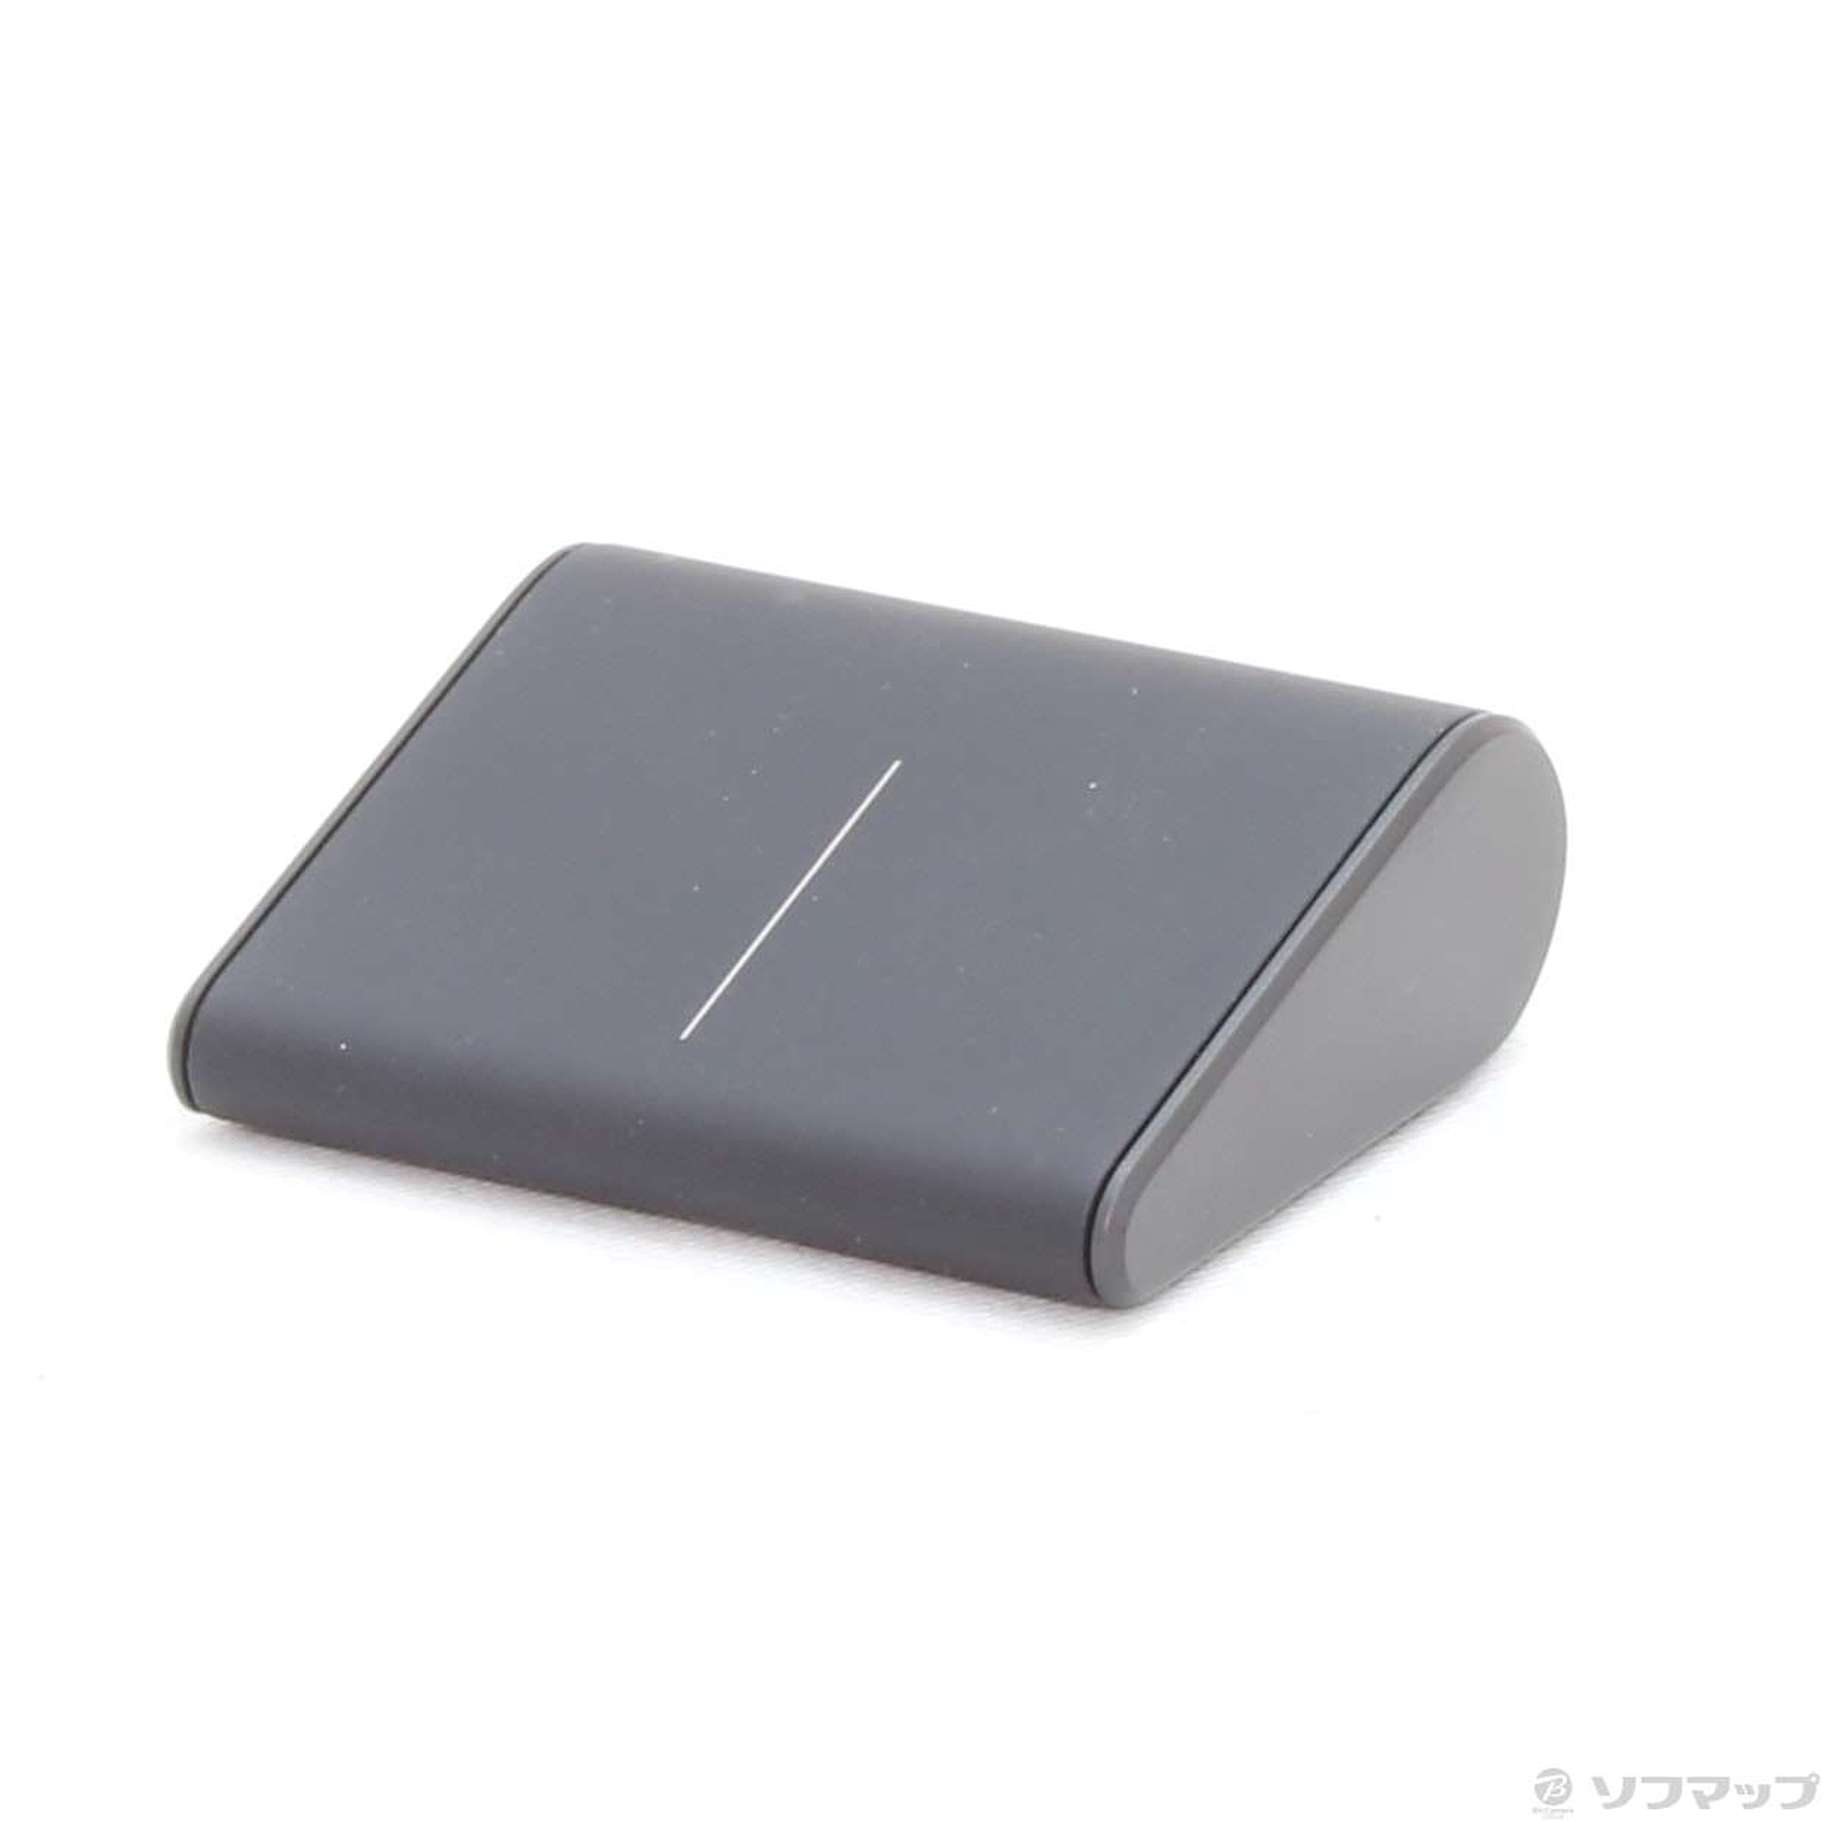 Wedge Touch Mouse Surface 6WV-00001